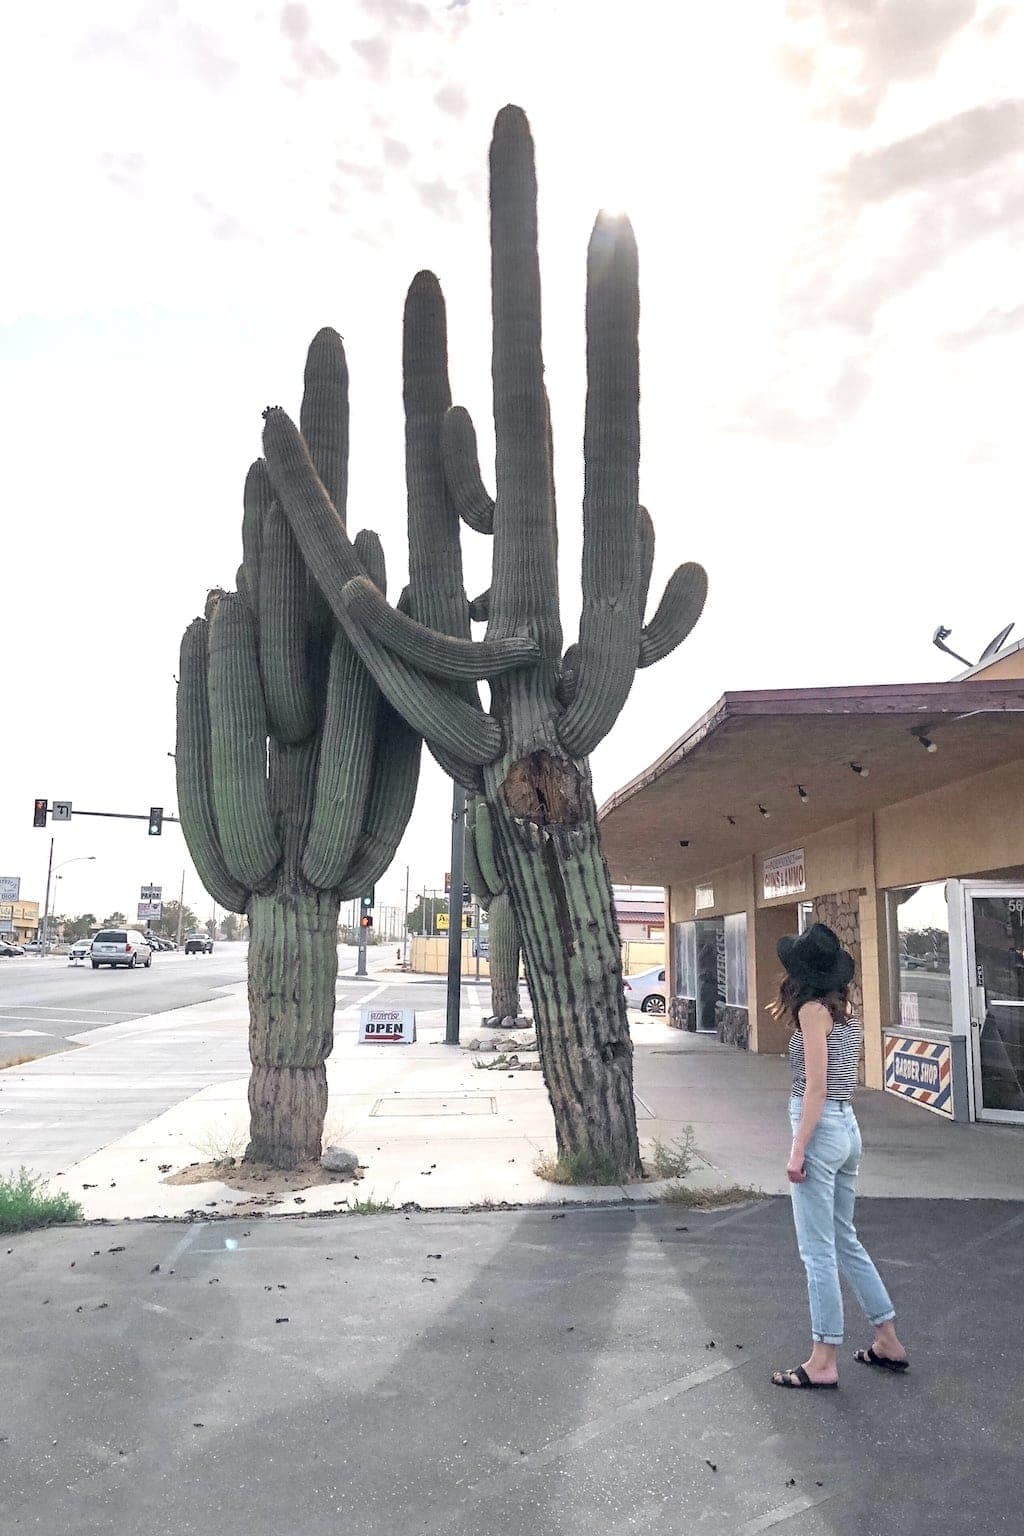 Giant Cactus at Yucca Valley barber shop